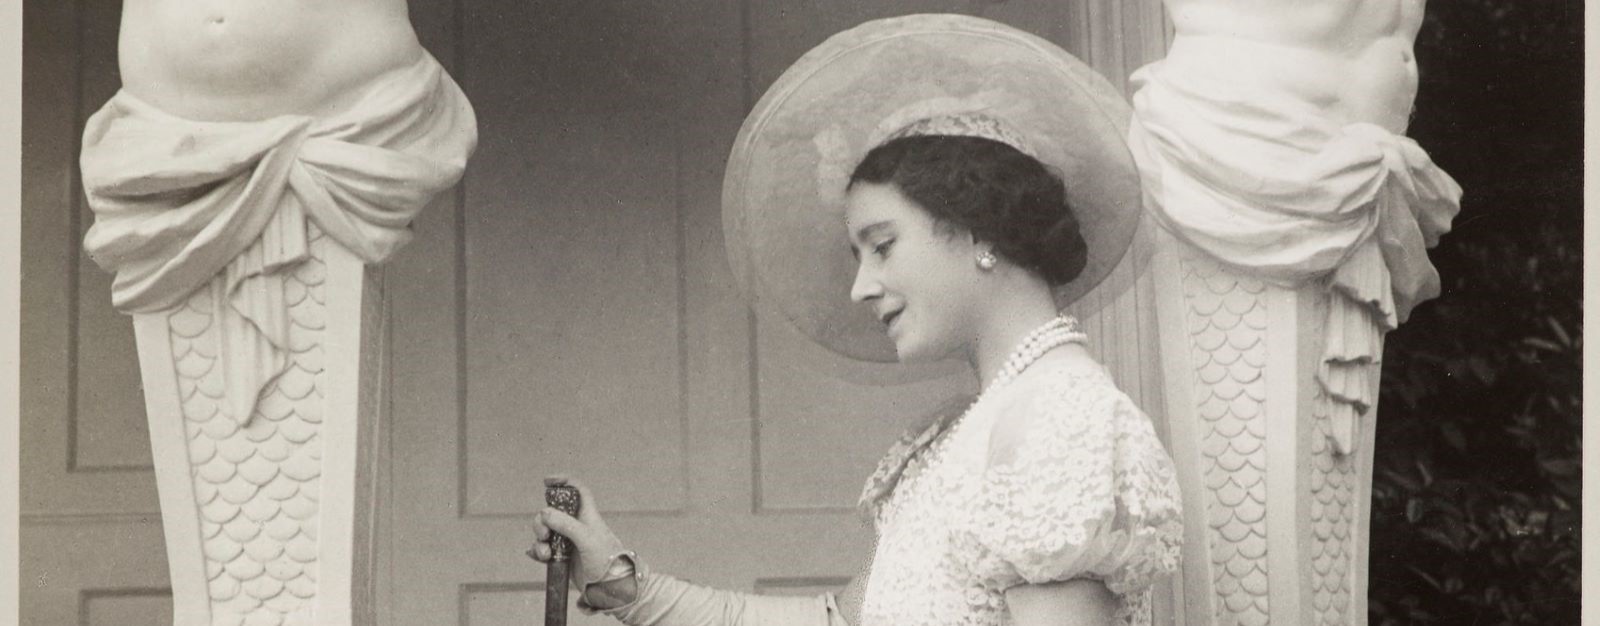 Black and white photograph of a Queen Elizabeth, The Queen mother.